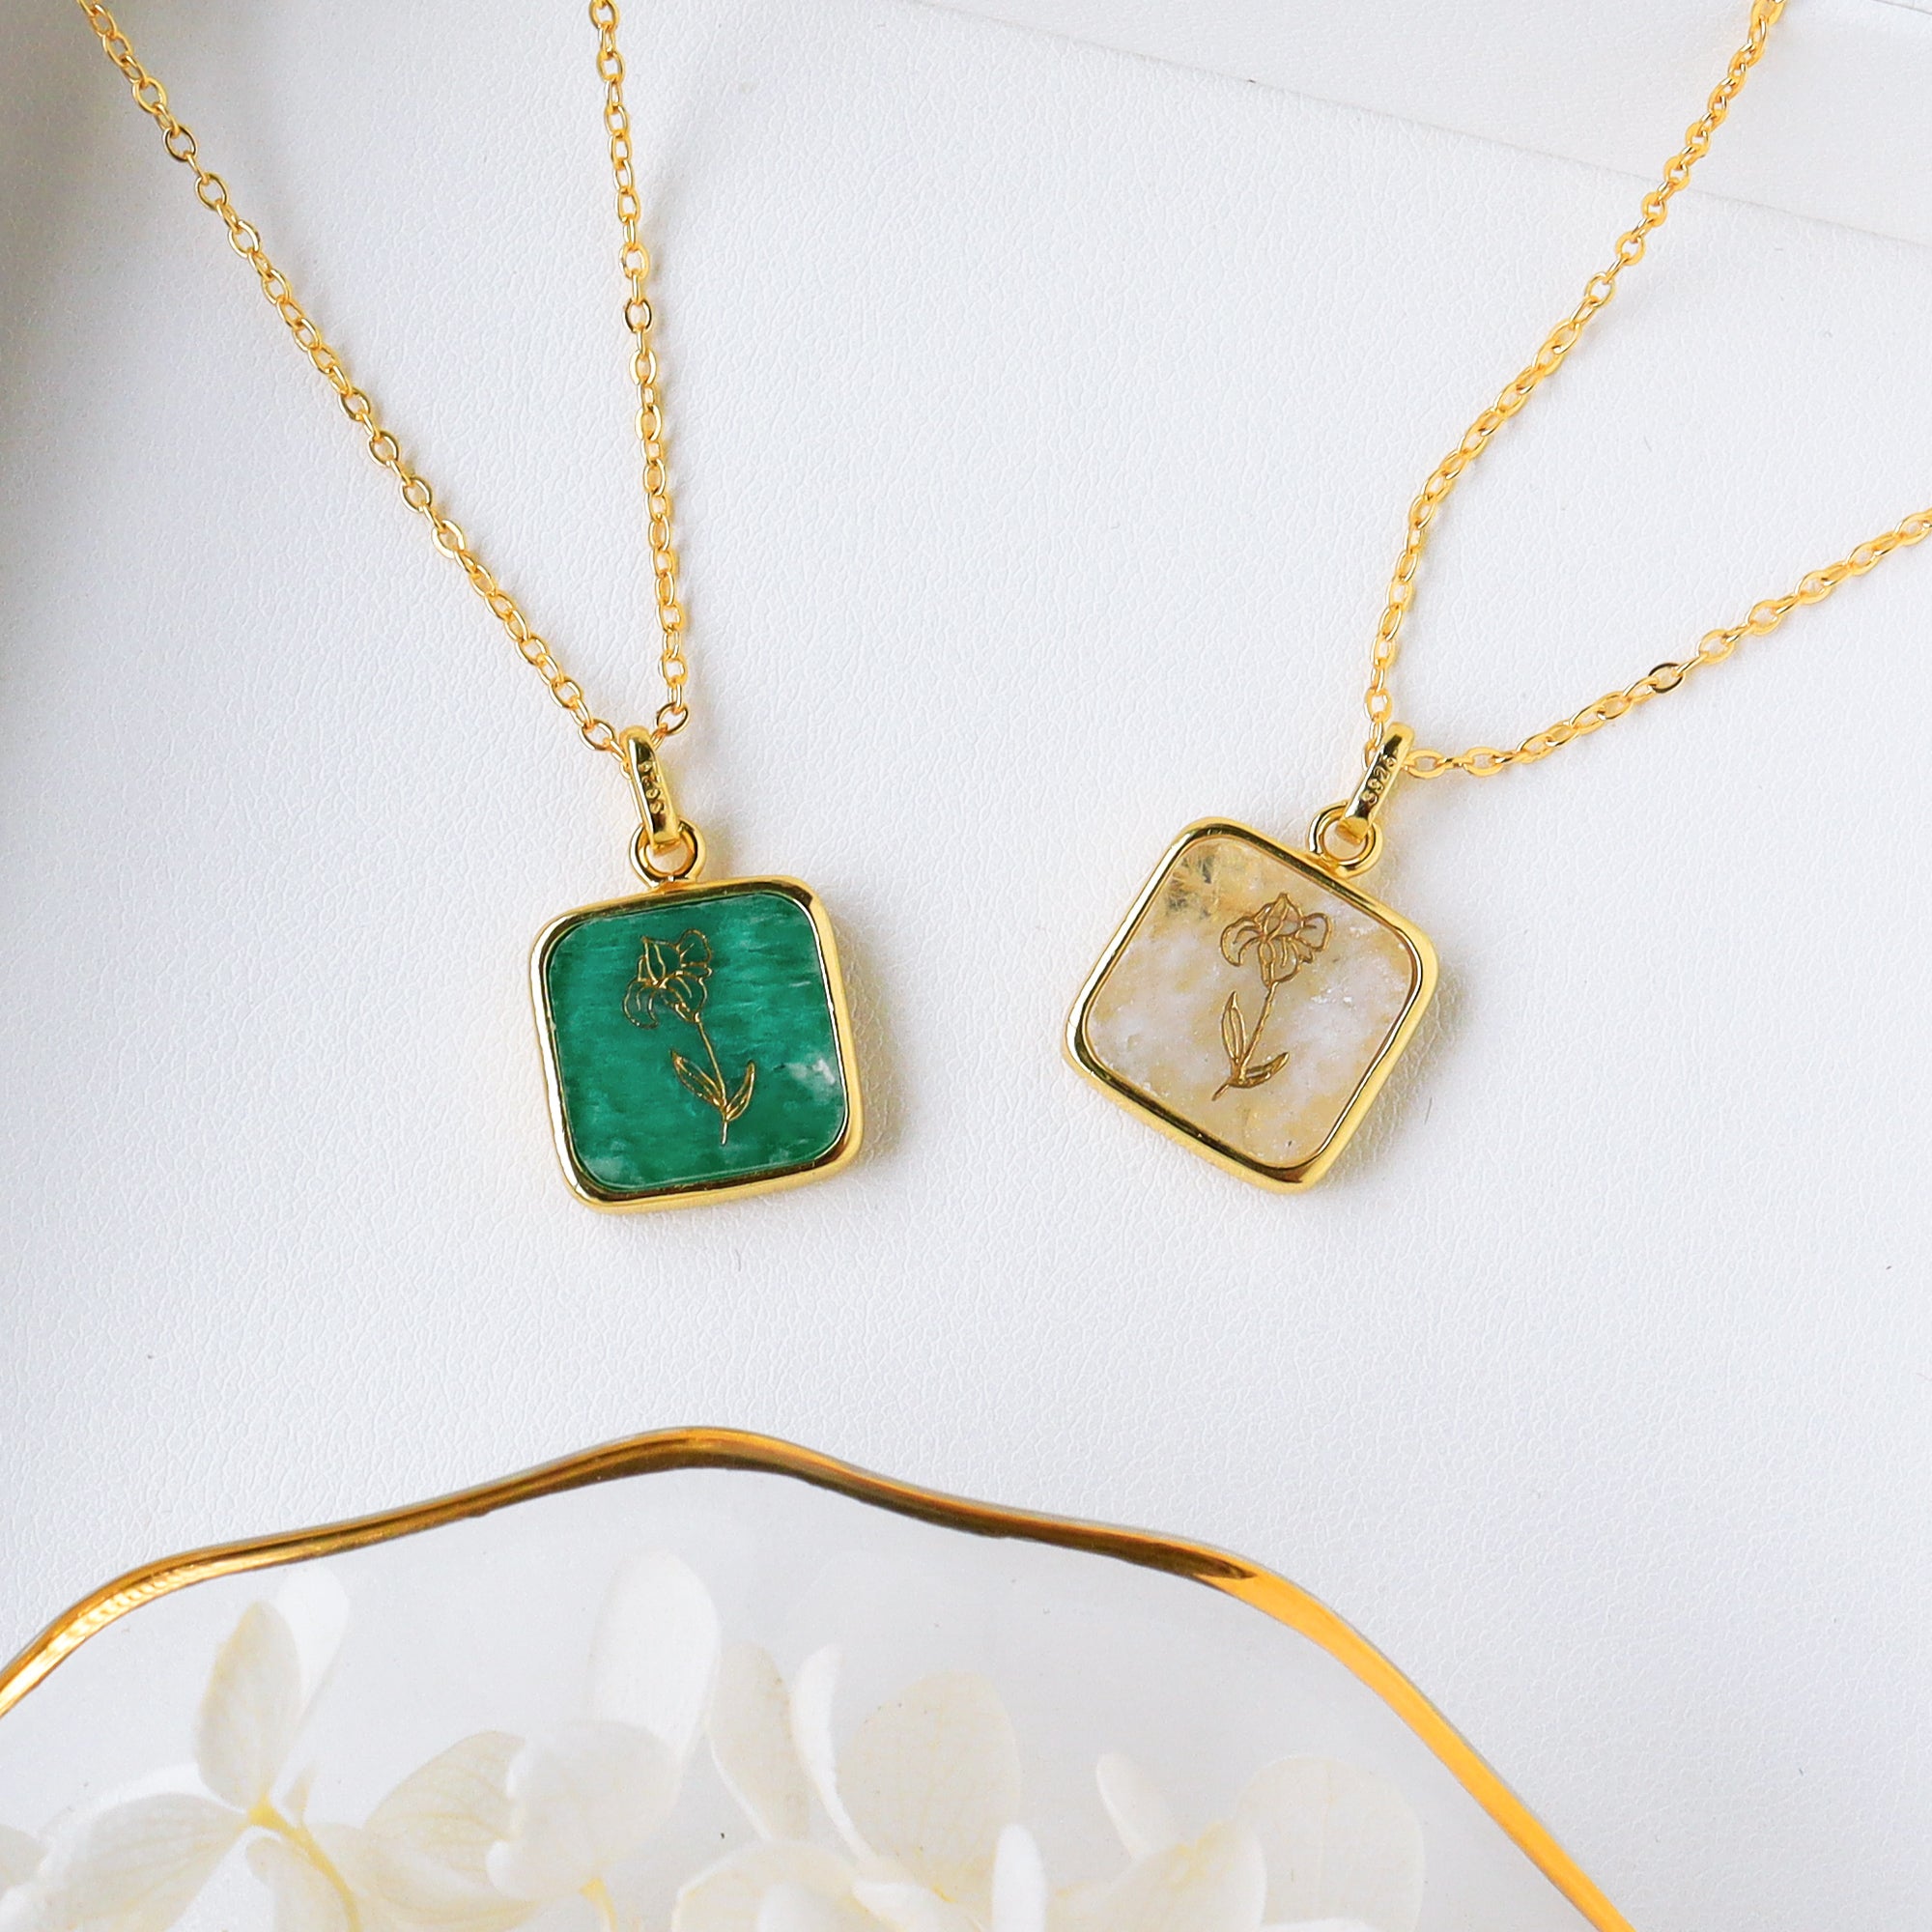 Wholesale 16" Gold Plated Square Gemstone Pendant Necklace, Carved Birth Month Flowers, Birthstone Jewelry KZ004